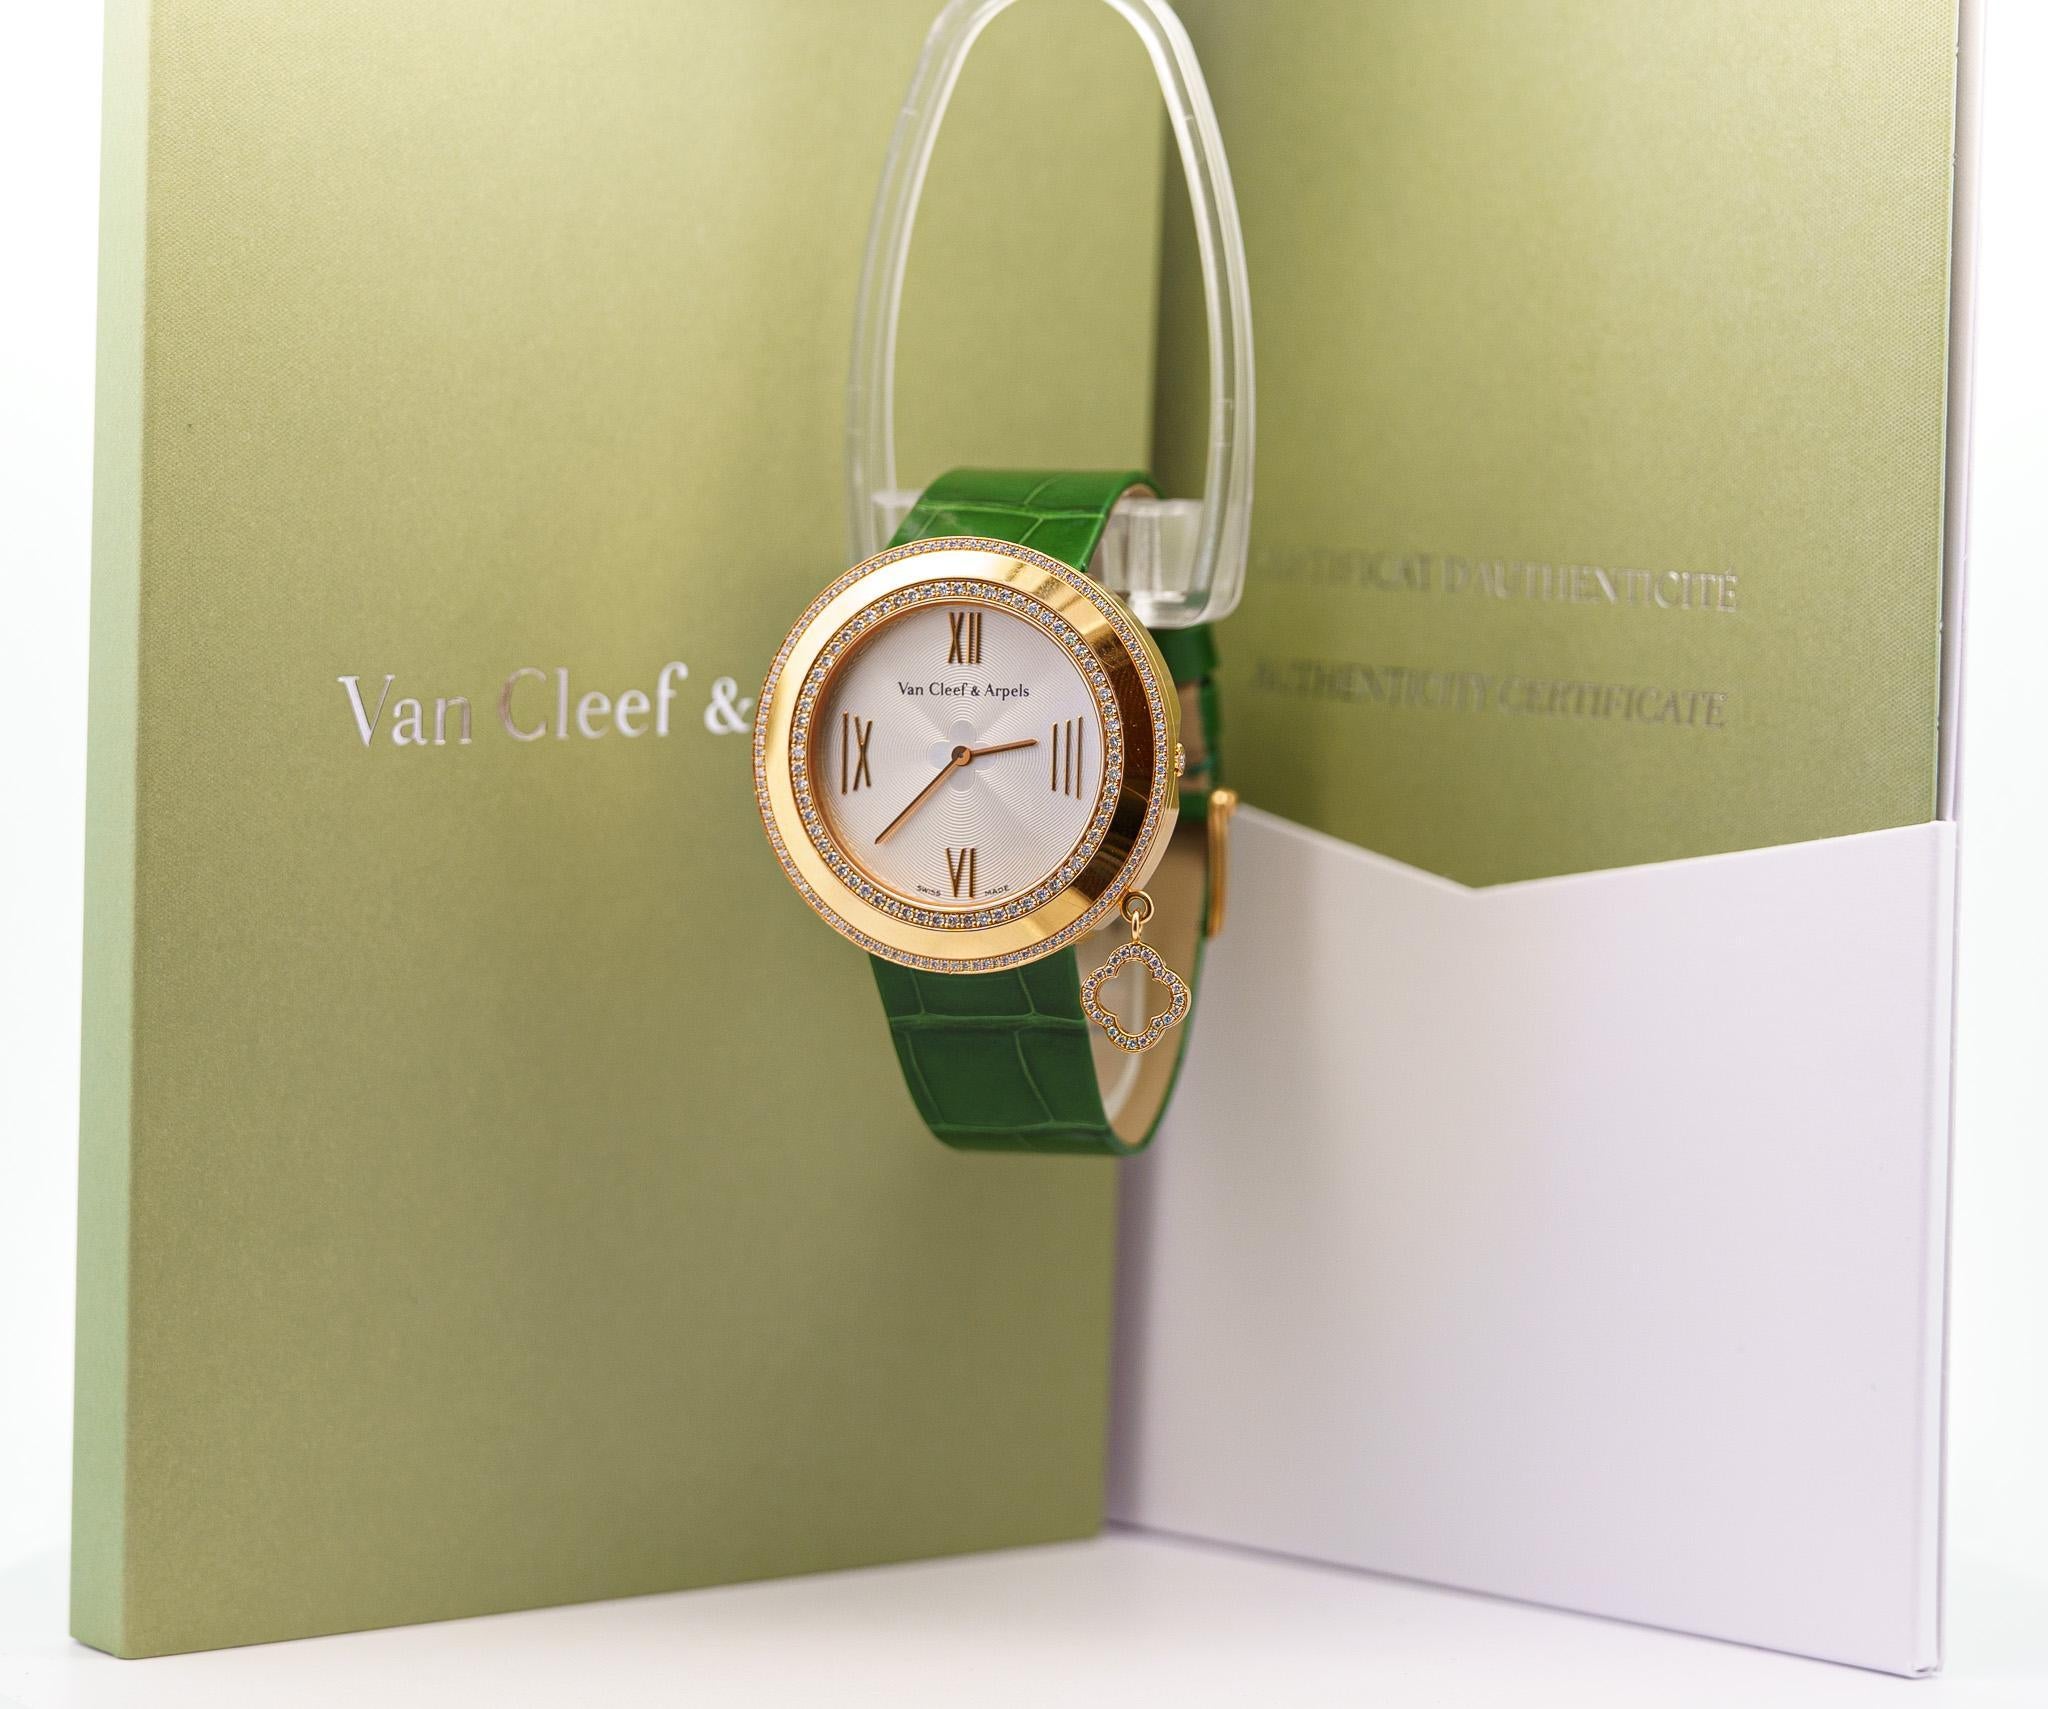 Van Cleef & Arpels Diamond Charms 38mm Women's Watch in 18K Rose Gold With Green Leather Strap. Complete with box and papers.

18k Rose gold case. Silver face, roman numeral hour markers. Adjustable alligator green leather band, tang clasp. Fixed